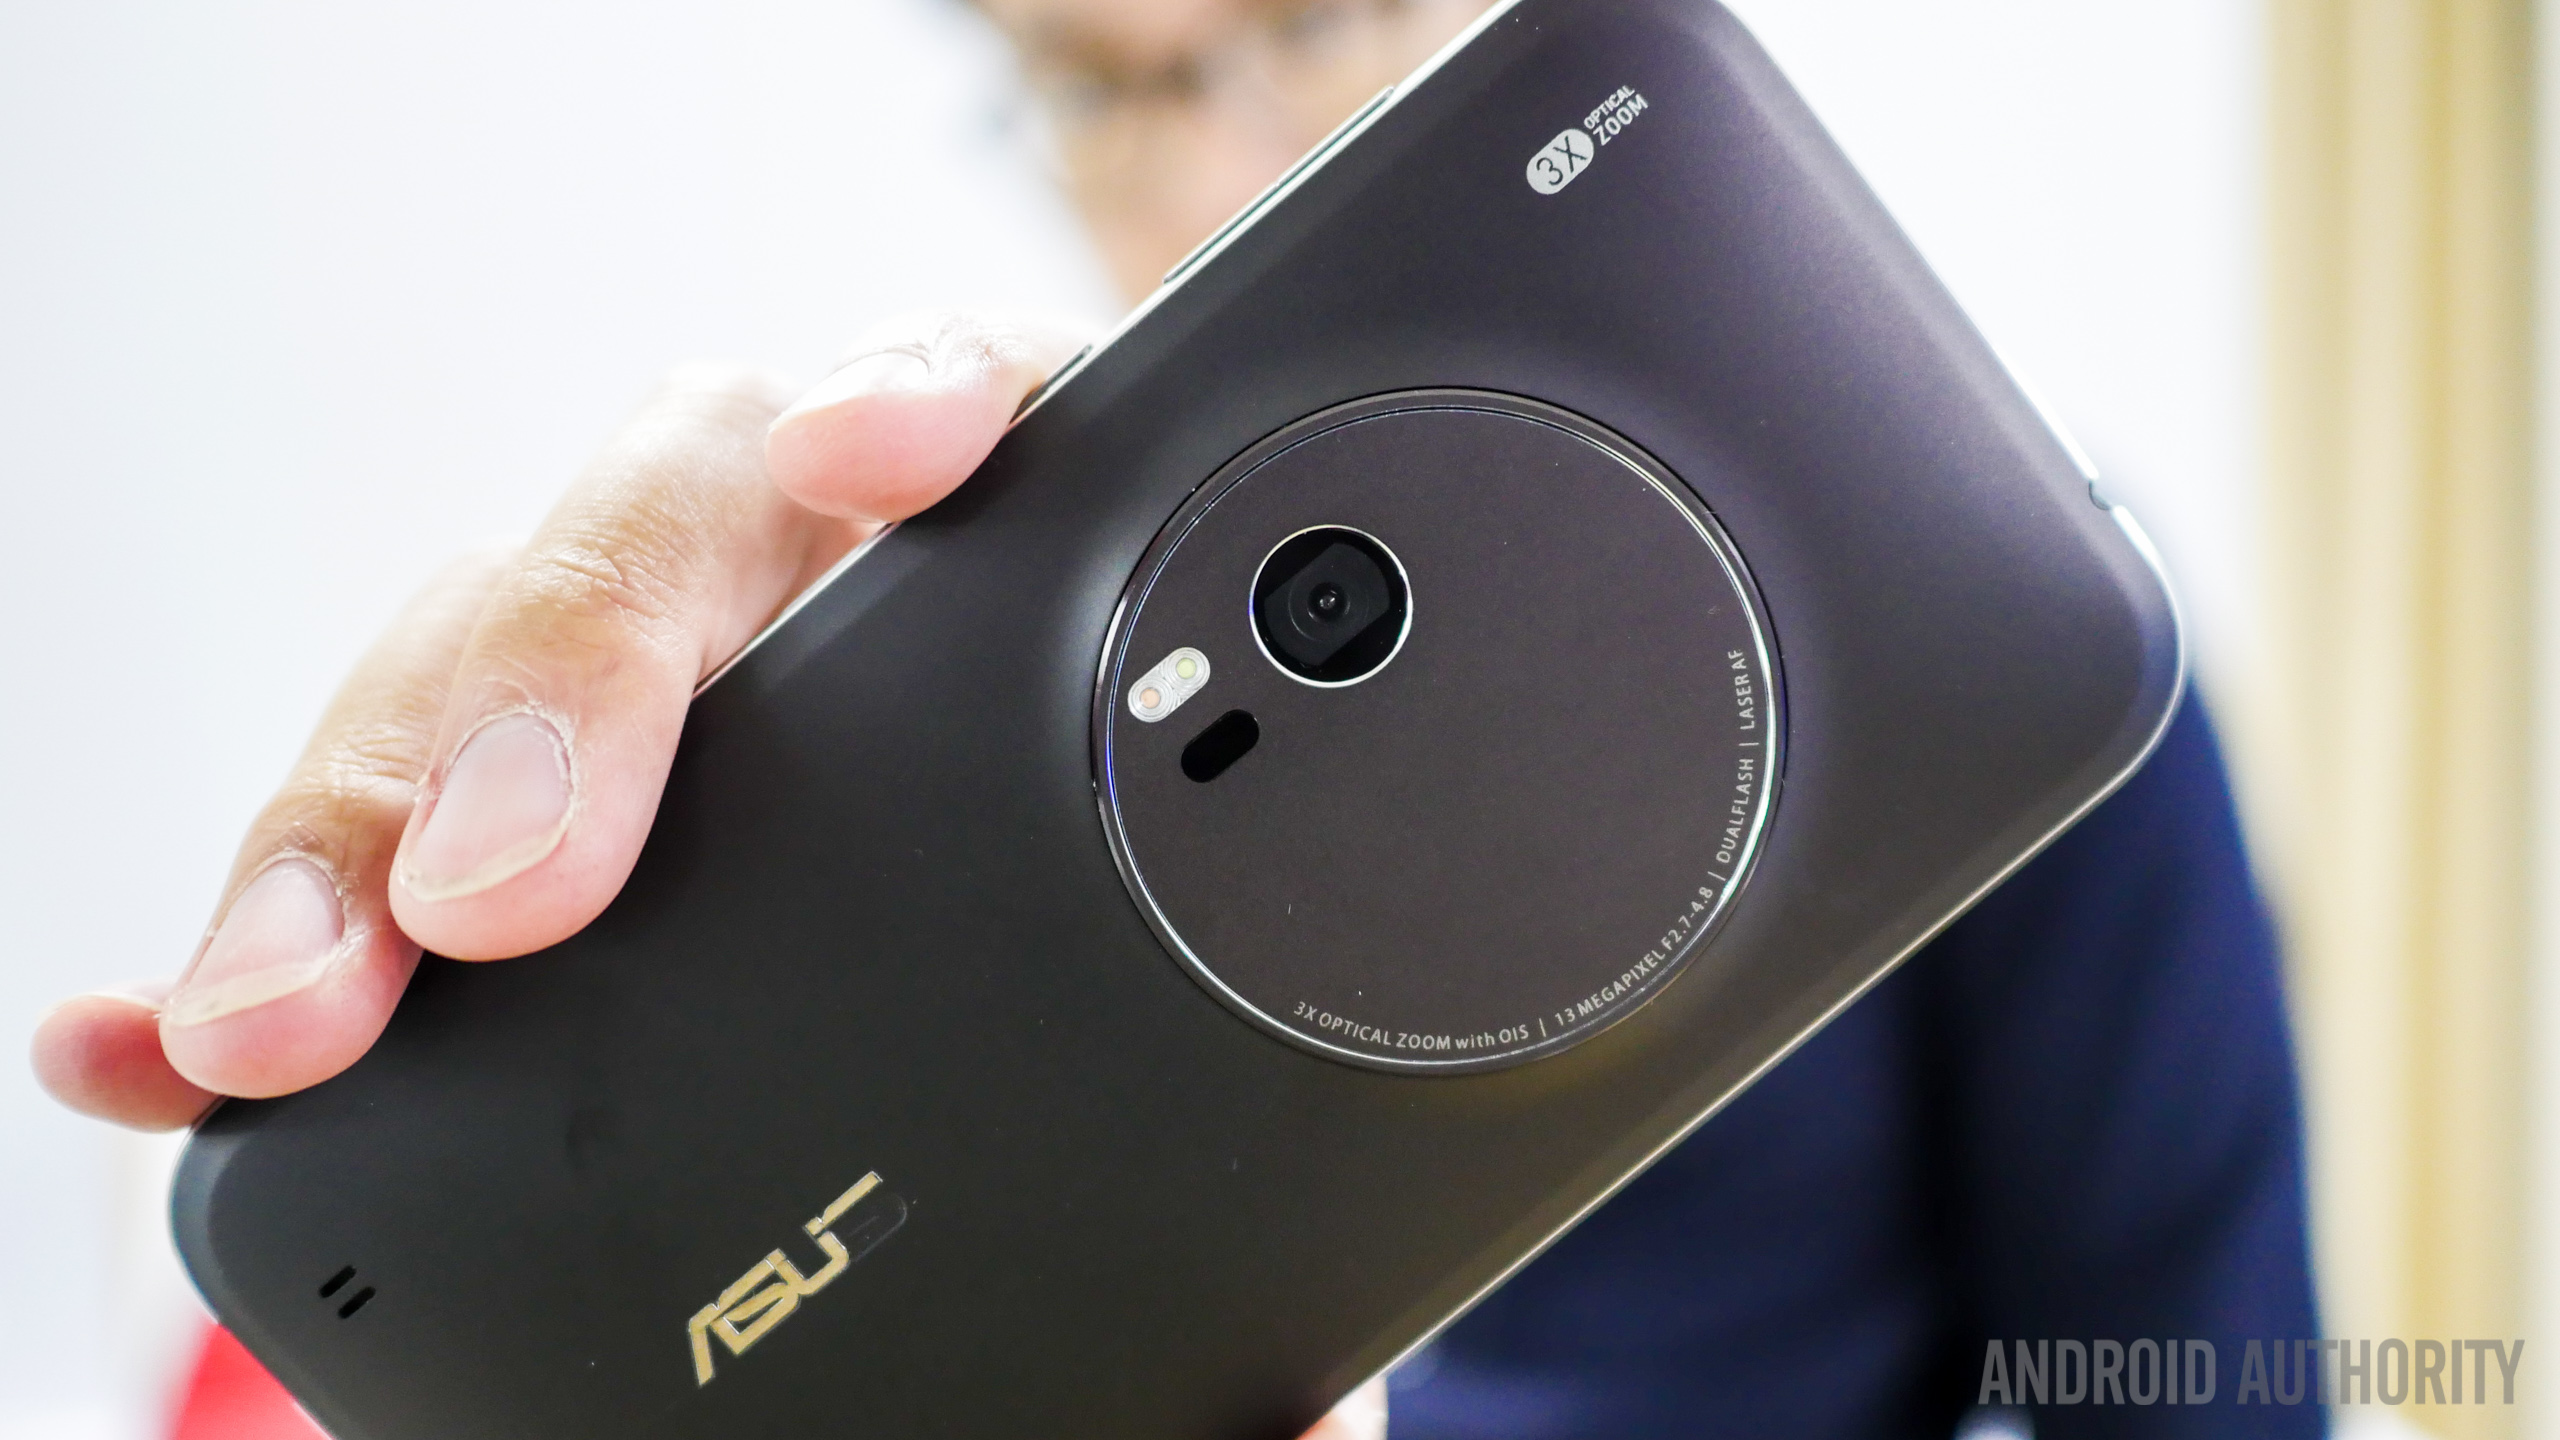 Asus Zenfone Zoom hands-on and first impressions